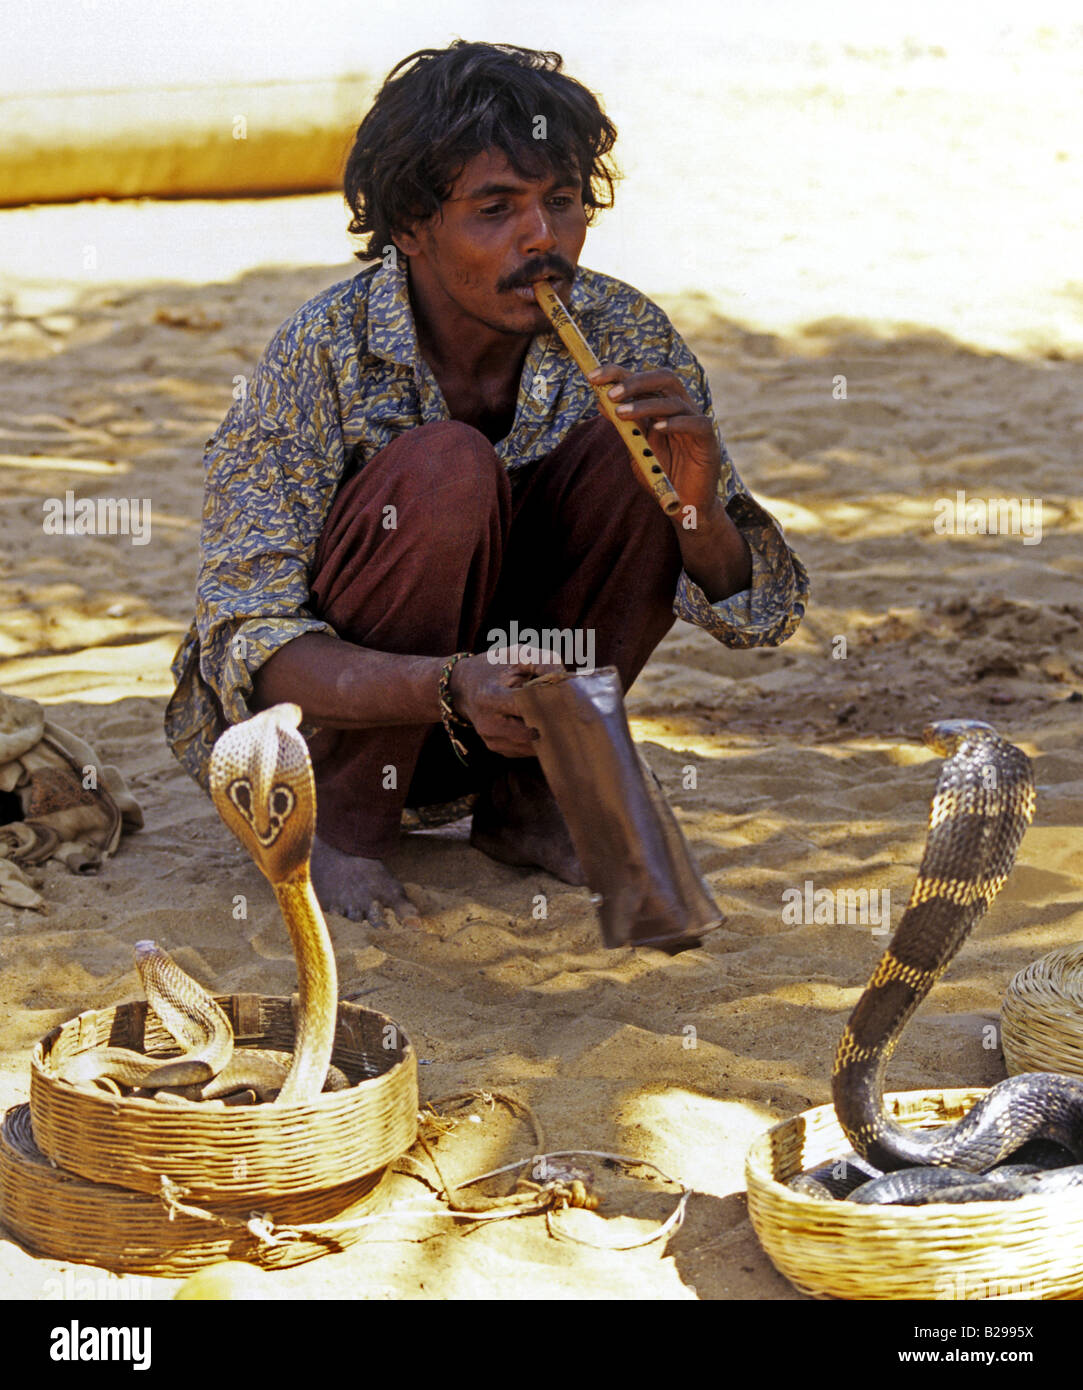 Snake charmer Goa State India Date 15 06 2008 Ref ZB548 115573 0156 COMPULSORY CREDIT World Pictures Photoshot Stock Photo